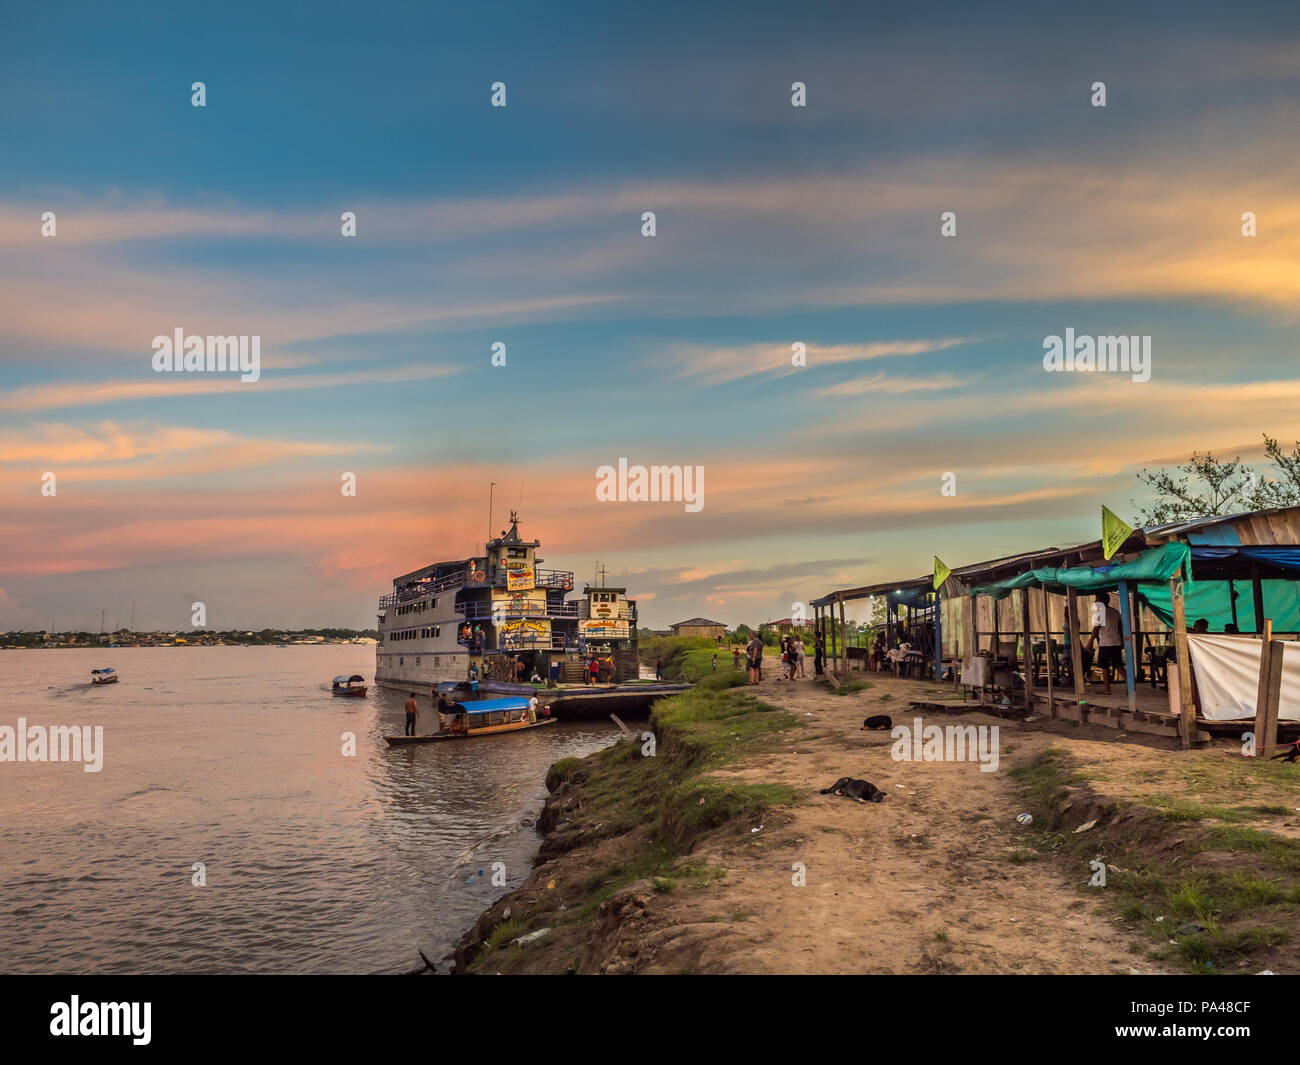 Santa Rosa, Peru - Mar 24, 2018: Sunset over the Amazon river and the cargo boat waiting at the port. Stock Photo